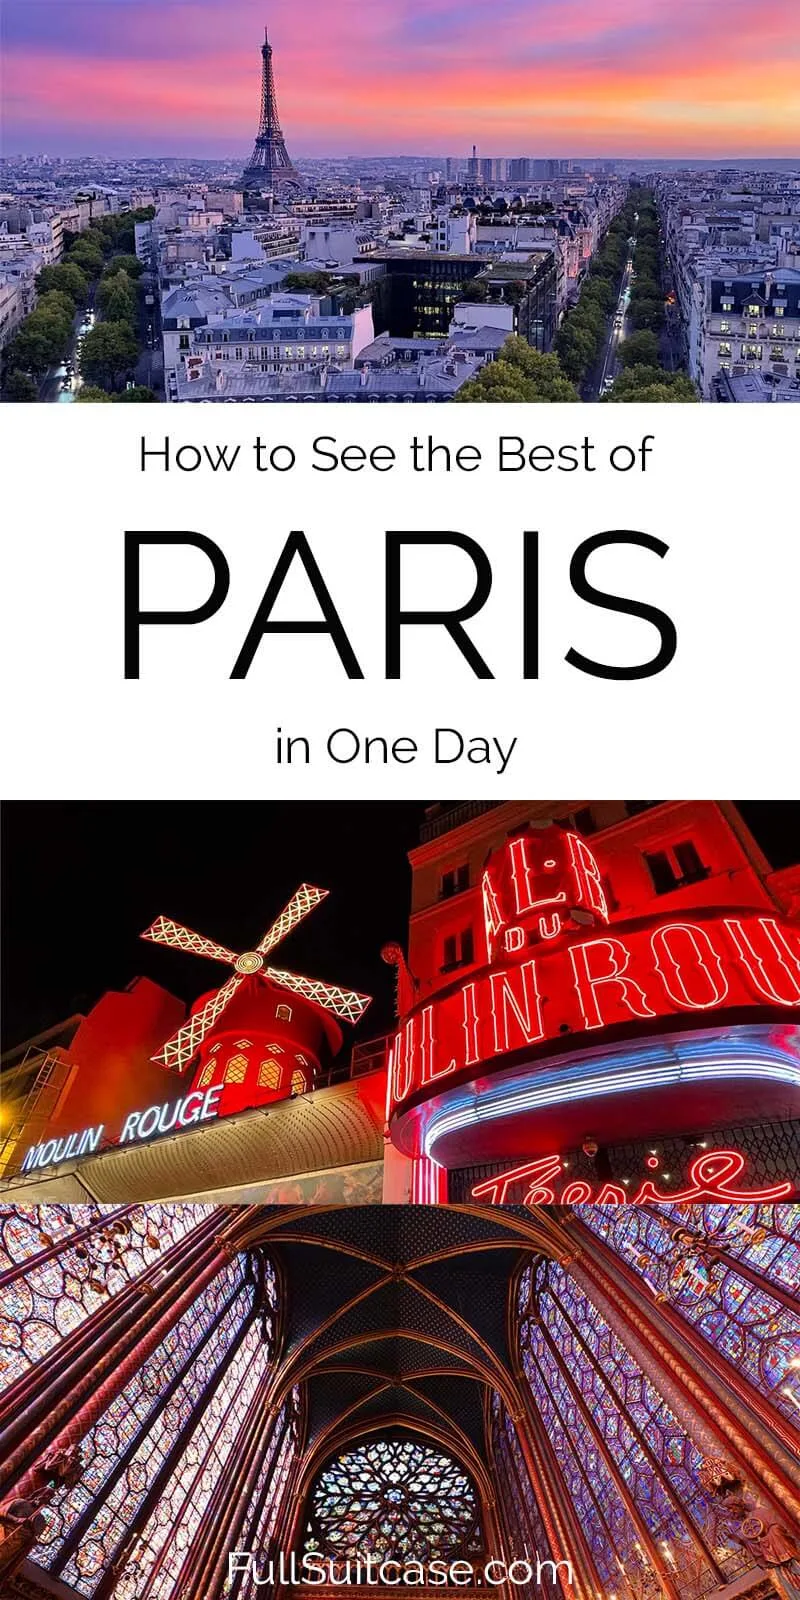 Best of Paris in 1 day - hour per hour itinerary and tips